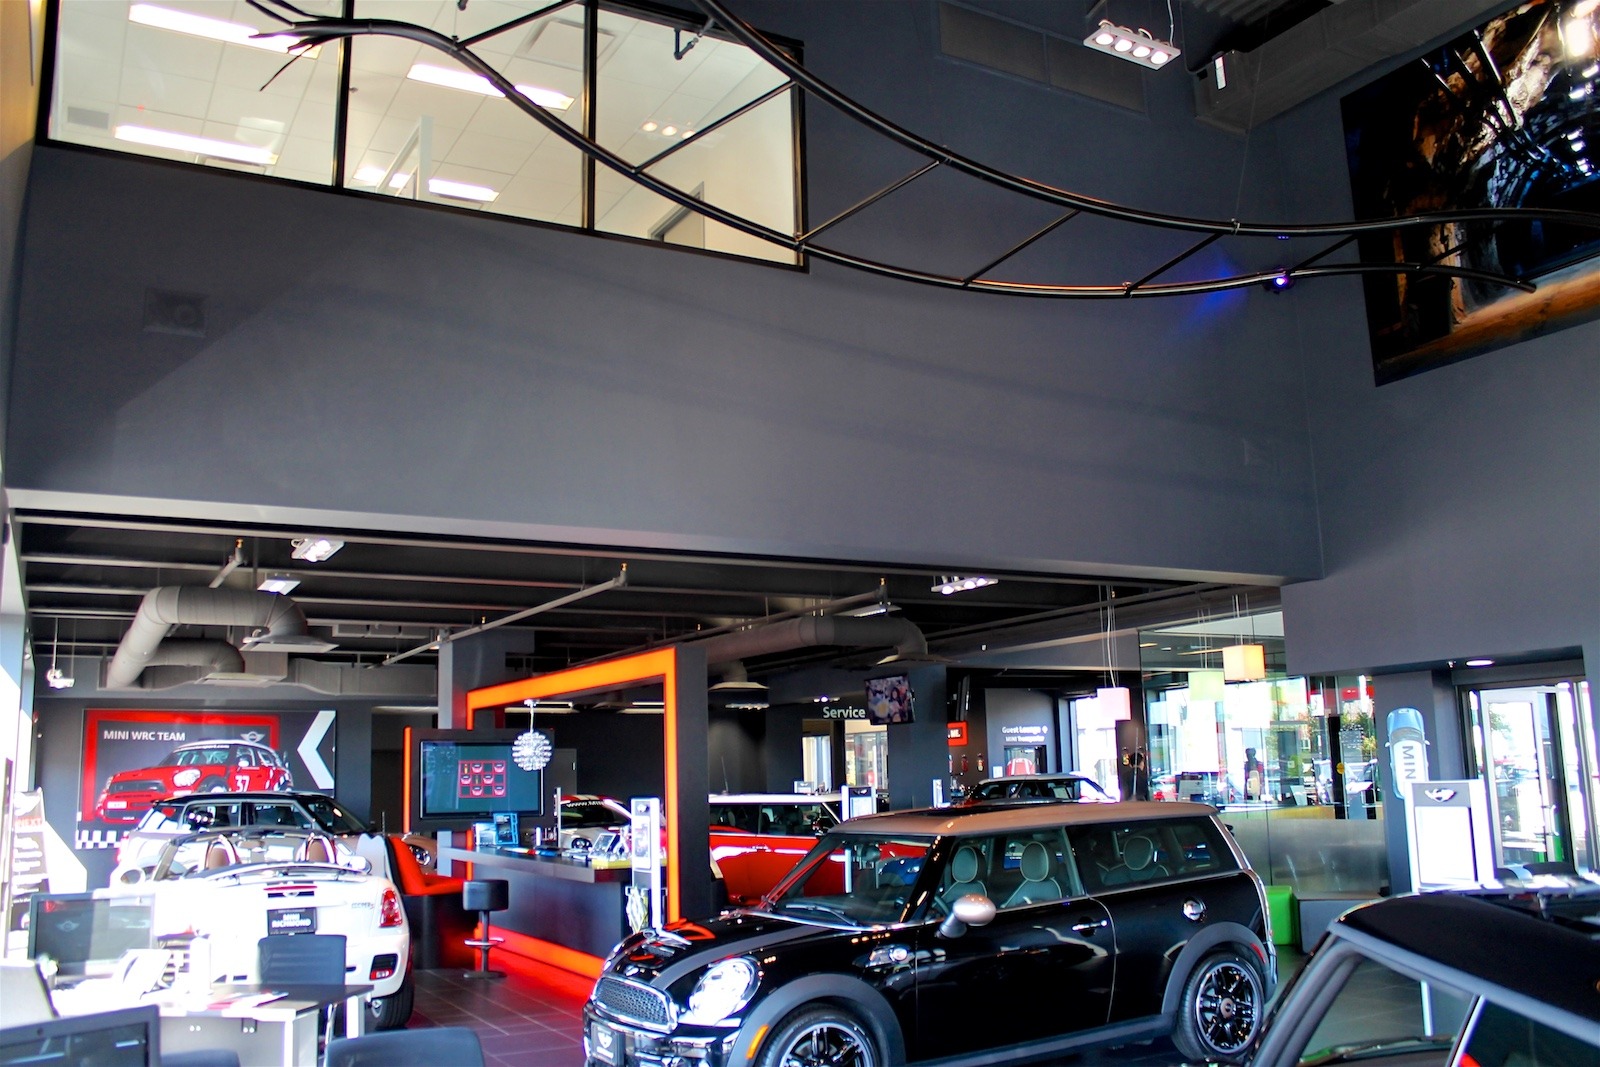 Robertson-Walls-Ceilings-Completed-Projects-Luxury-Car-Dealerships-Mini-Richmond-2 MINI RICHMOND